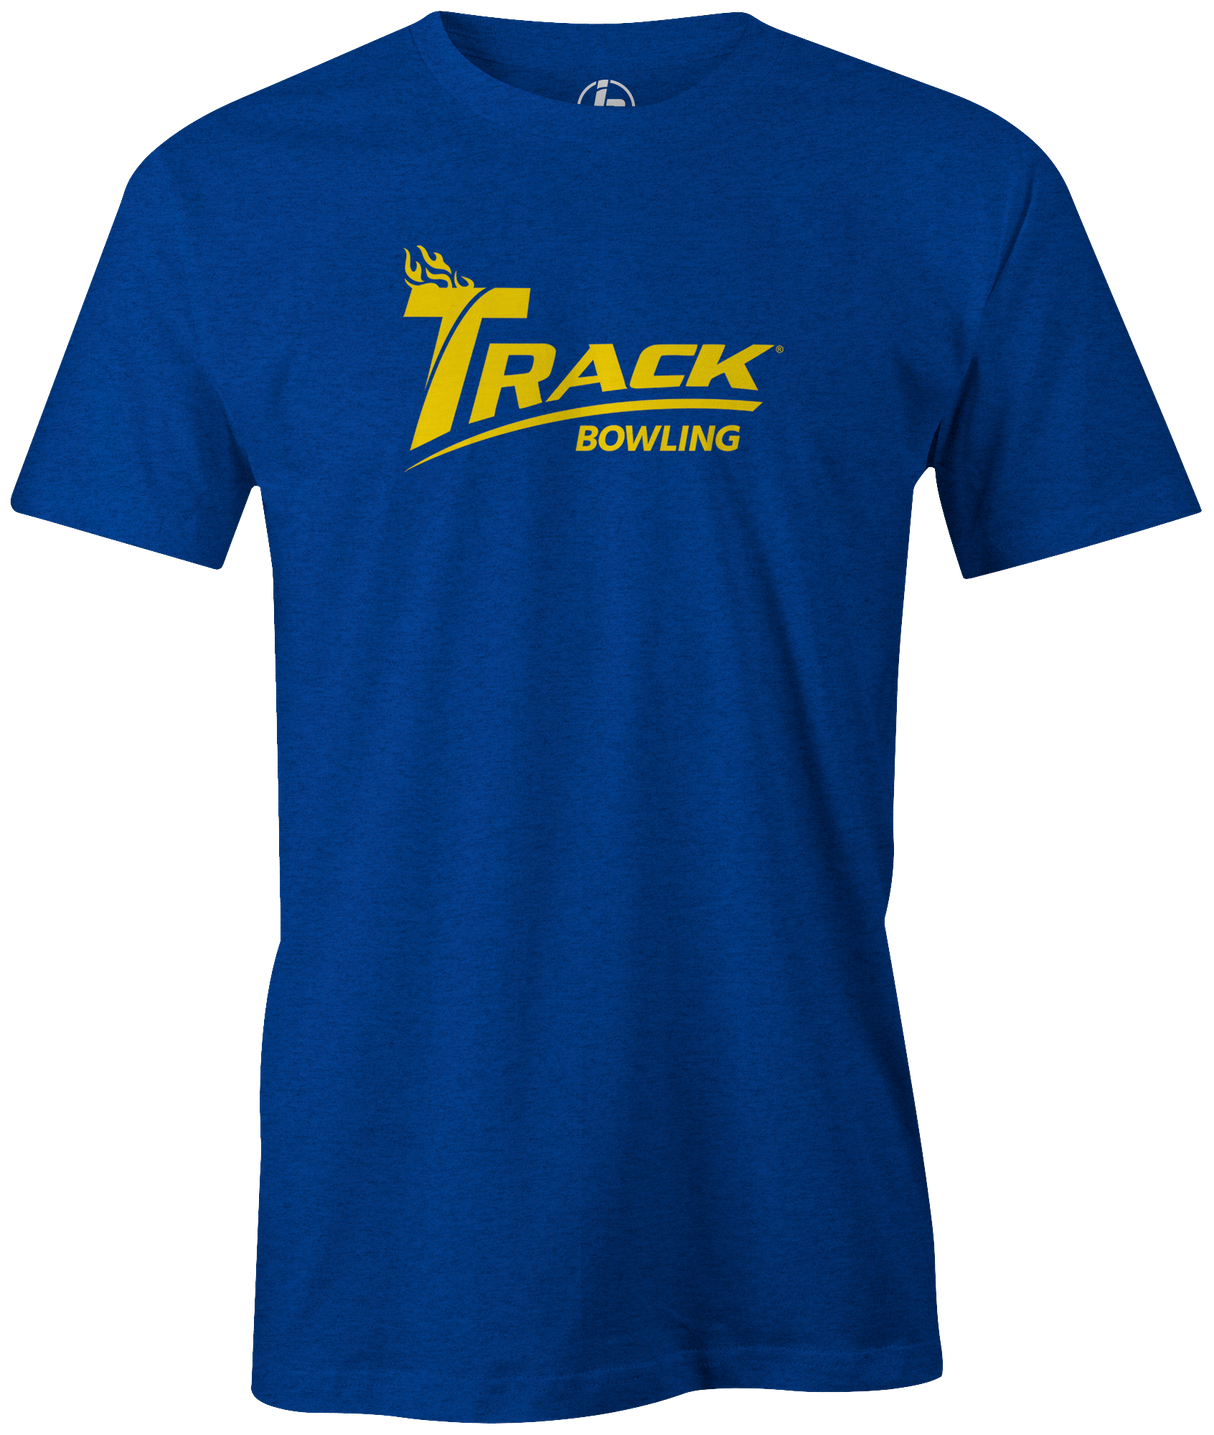 Rep the tech brand you all know and love with this "Track" classic logo tee. This is the perfect gift for any long time Track fan or avid bowler! Grab this awesome tee and rep the team!  Tshirt, tee, tee-shirt, tee shirt, Pro shop. League bowling team shirt. PBA. PWBA. USBC. Junior Gold. Youth bowling. Tournament t-shirt. Men's. track bowling. track. bowling ball. bowling ball brand. logo. track logo. 